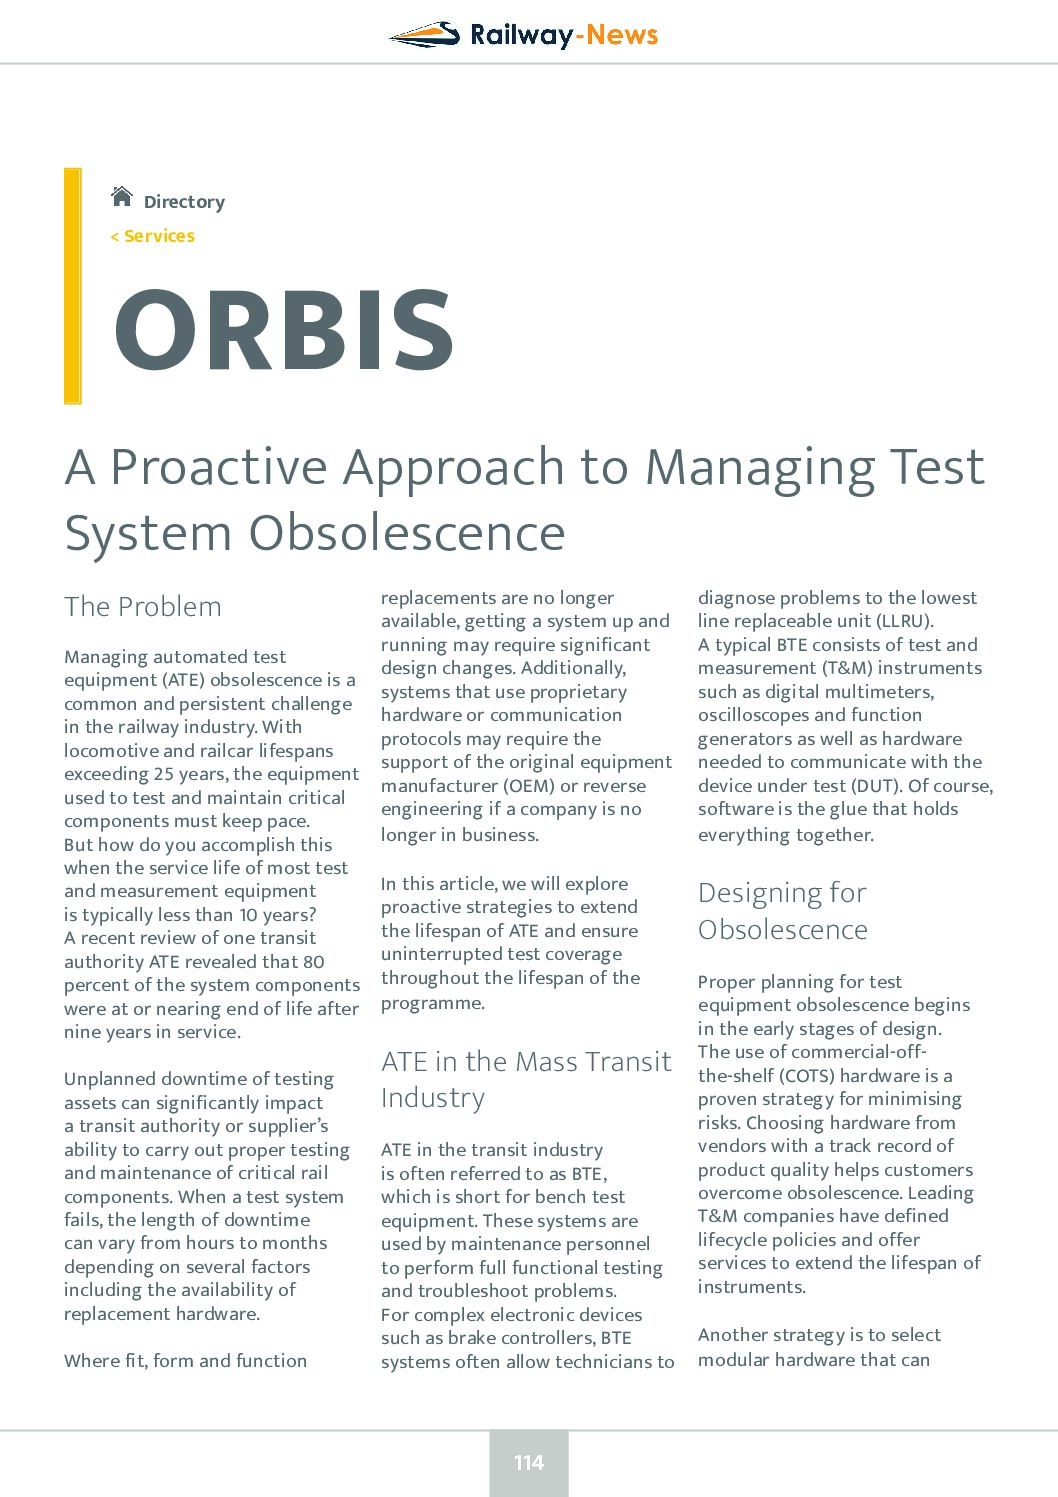 A Proactive Approach to Managing Test System Obsolescence